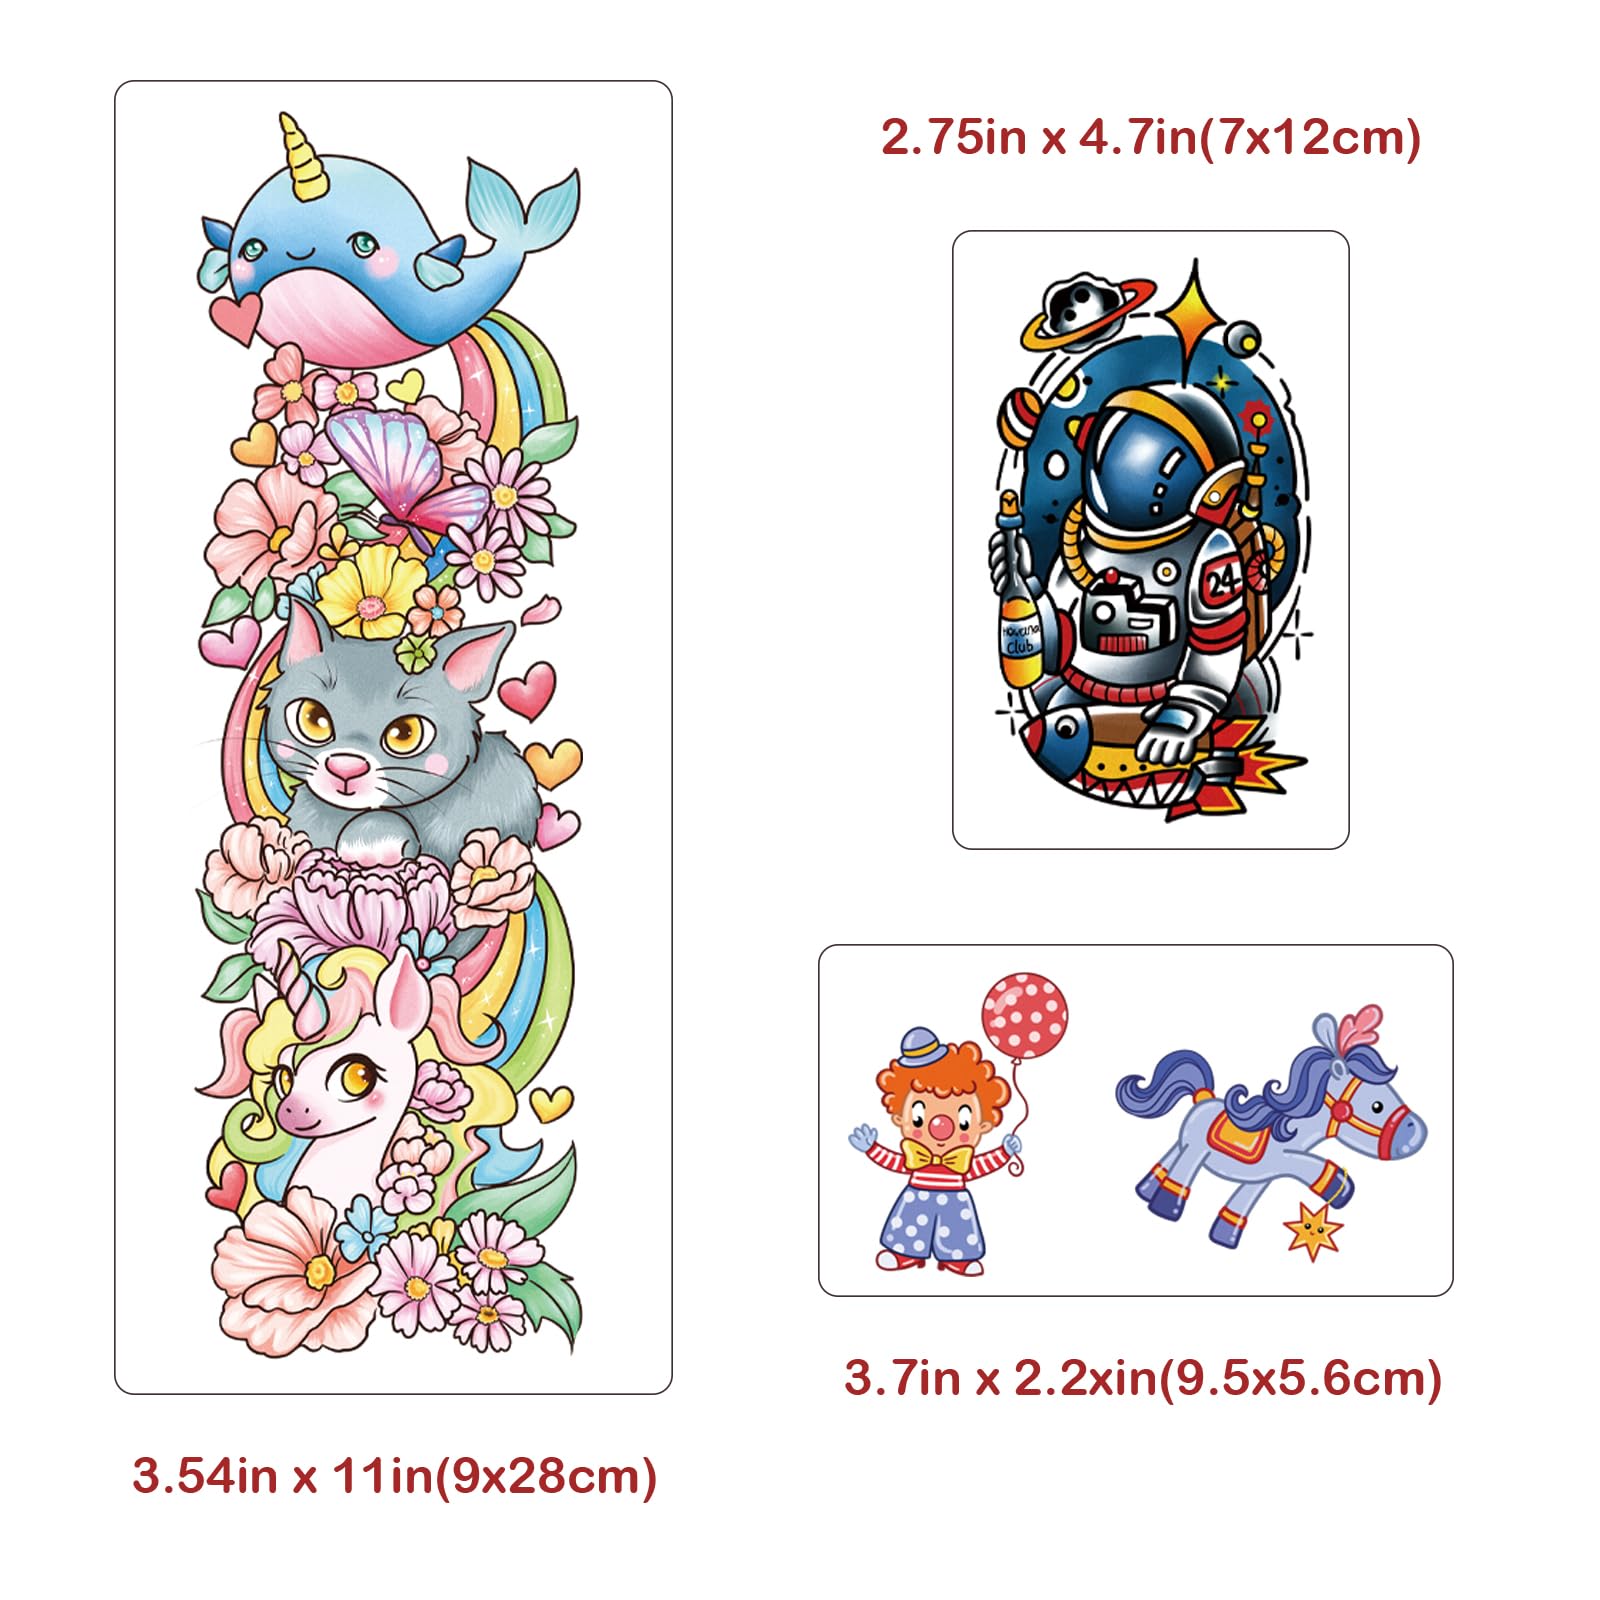 Temporary Tattoo for kids, 52 PCS Fake Tattoos Temporary for Boys Girls, Cute Cat Dinosaur Unicorn Animal Body Arm Tattoos Stickers, Birthday Party Supplies Gifts for 3 4 5 6 7 8 9 Year Old Kids